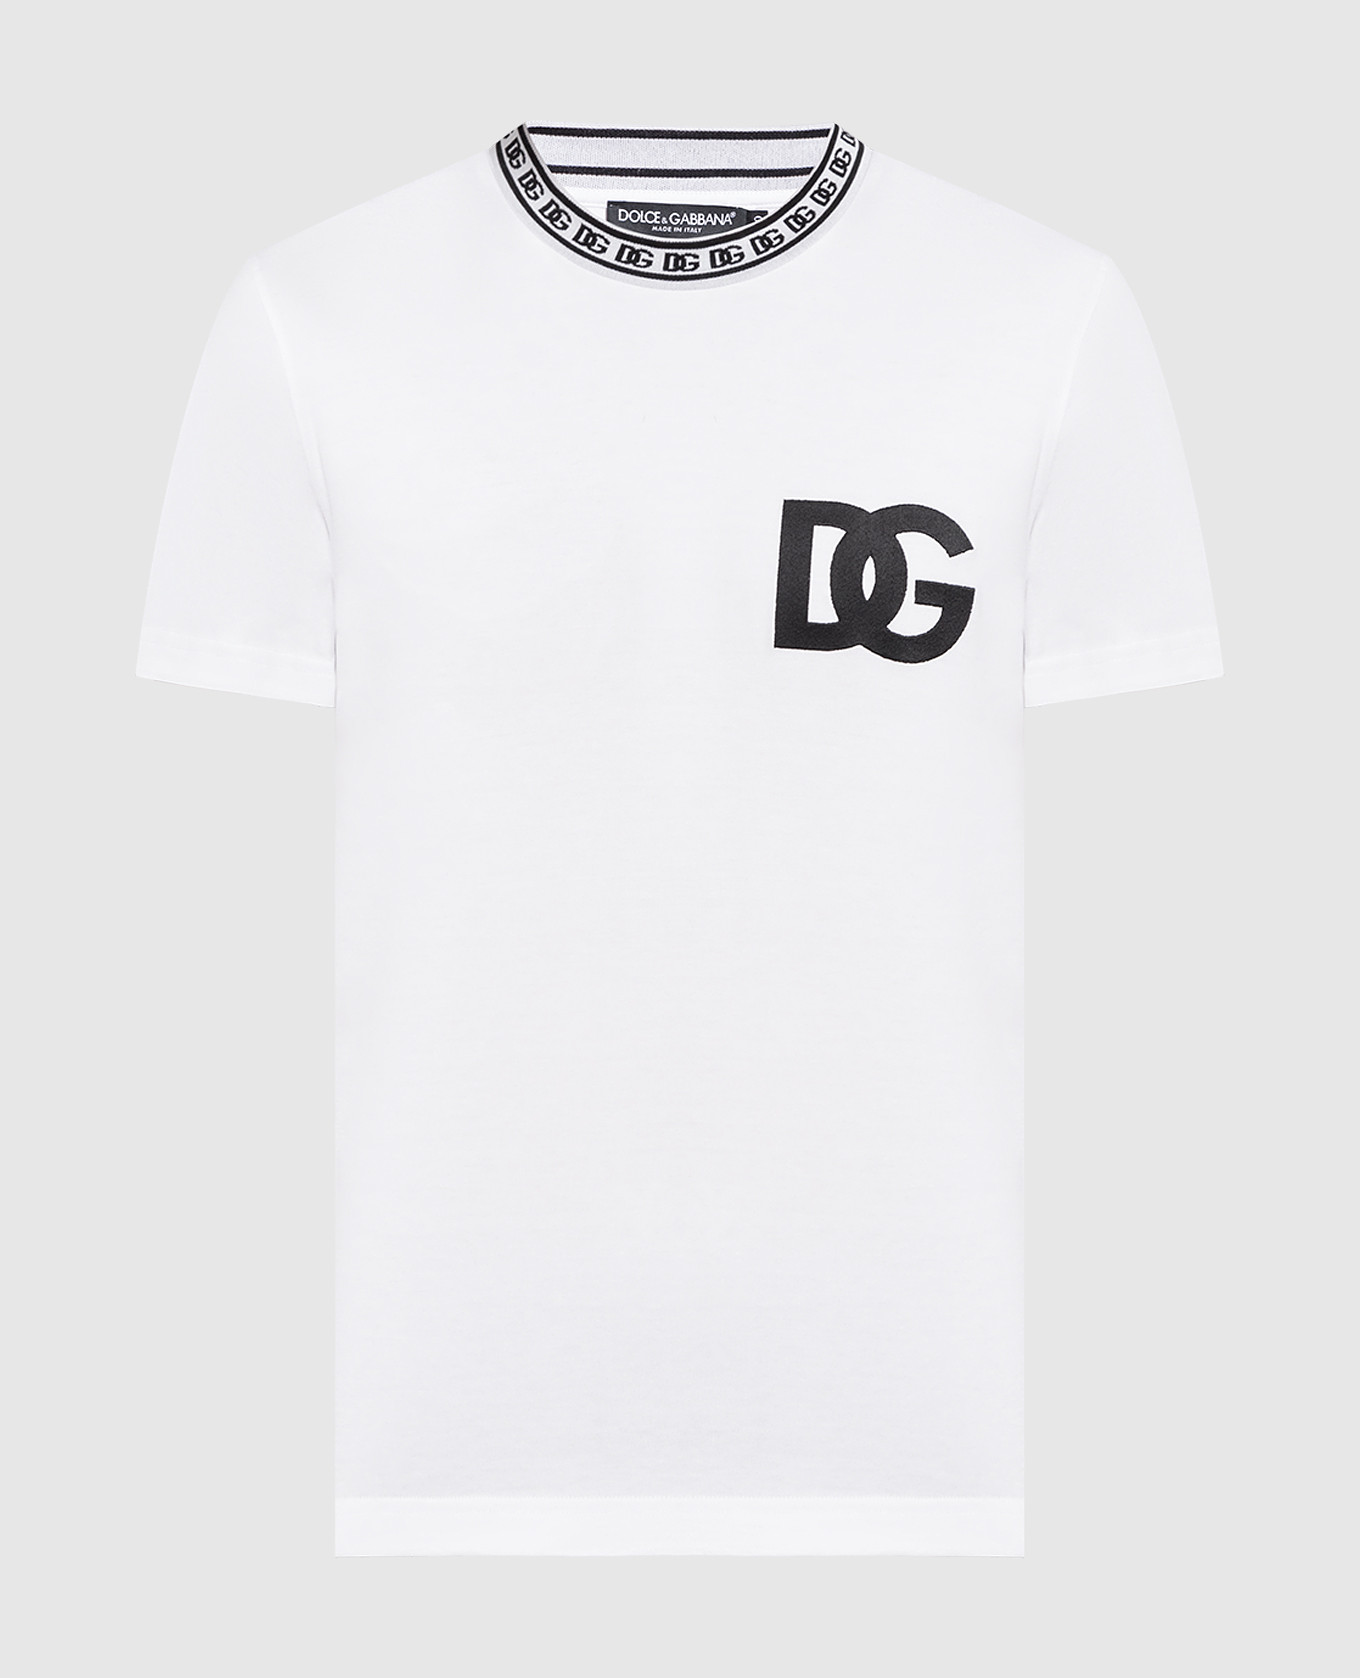 White t-shirt with contrasting DG logo embroidery